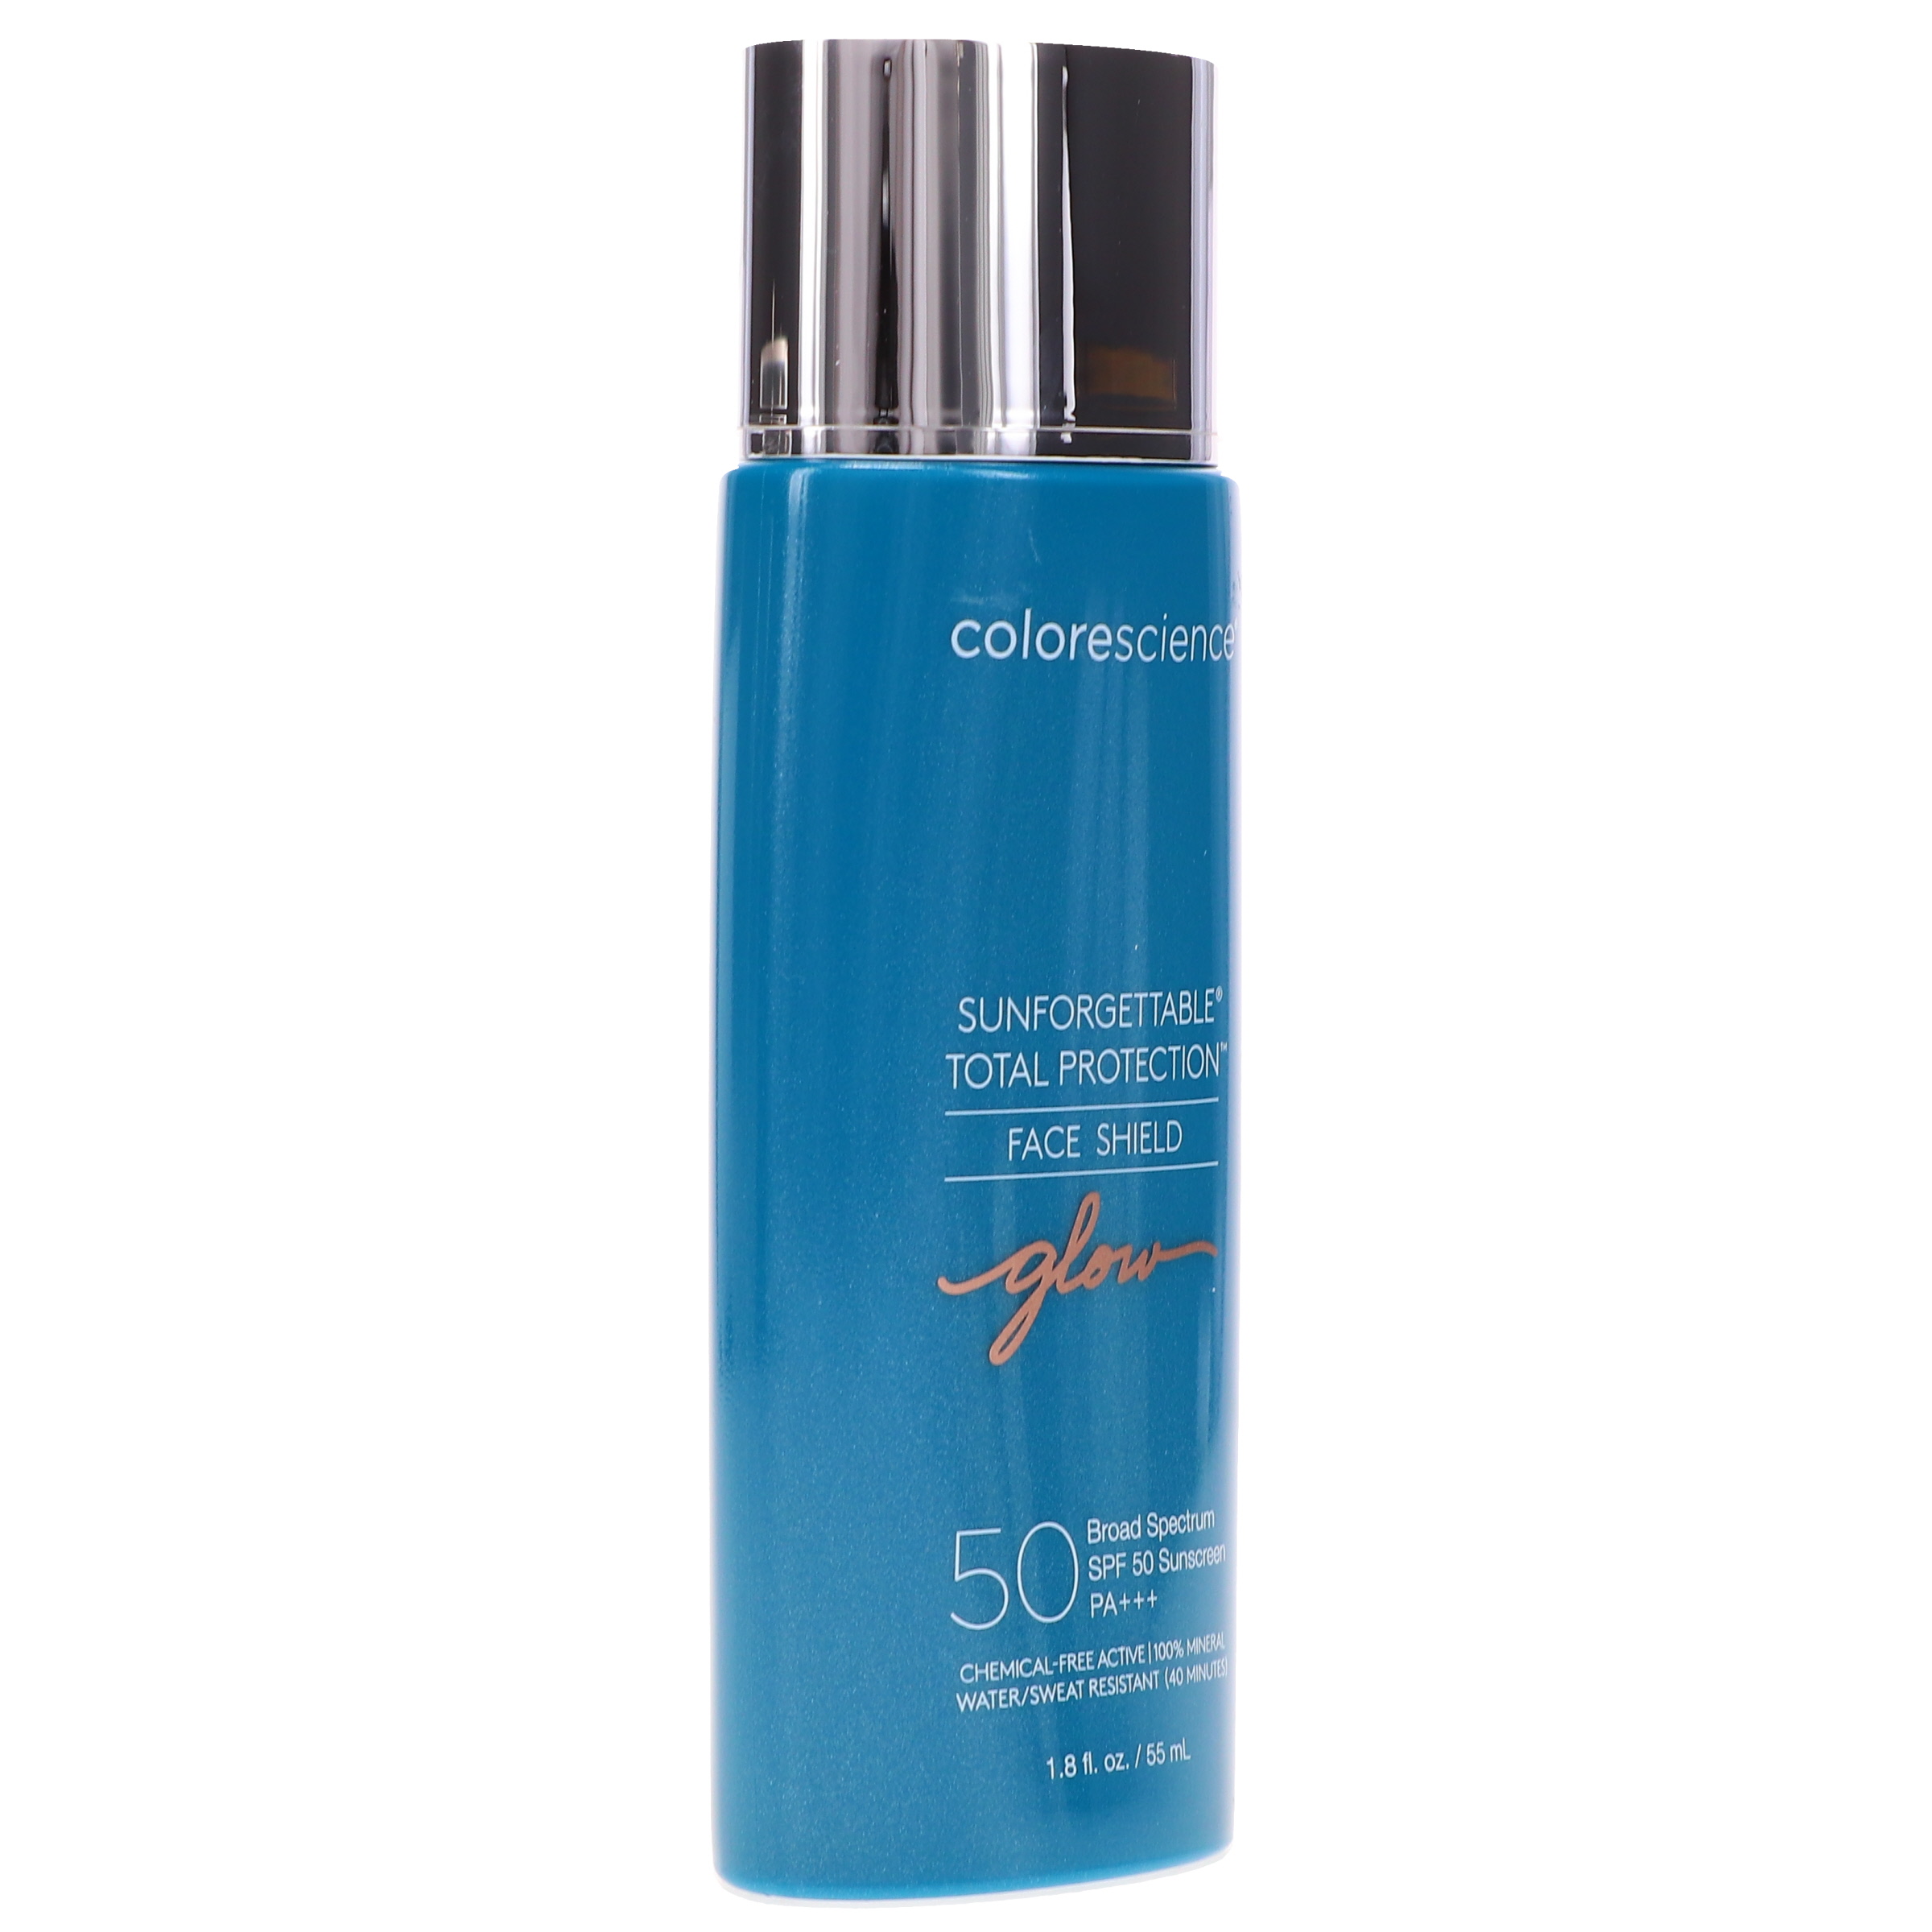 Colorescience Total Protection Face Shield SPF 50 Glow 1.8 oz - image 5 of 8